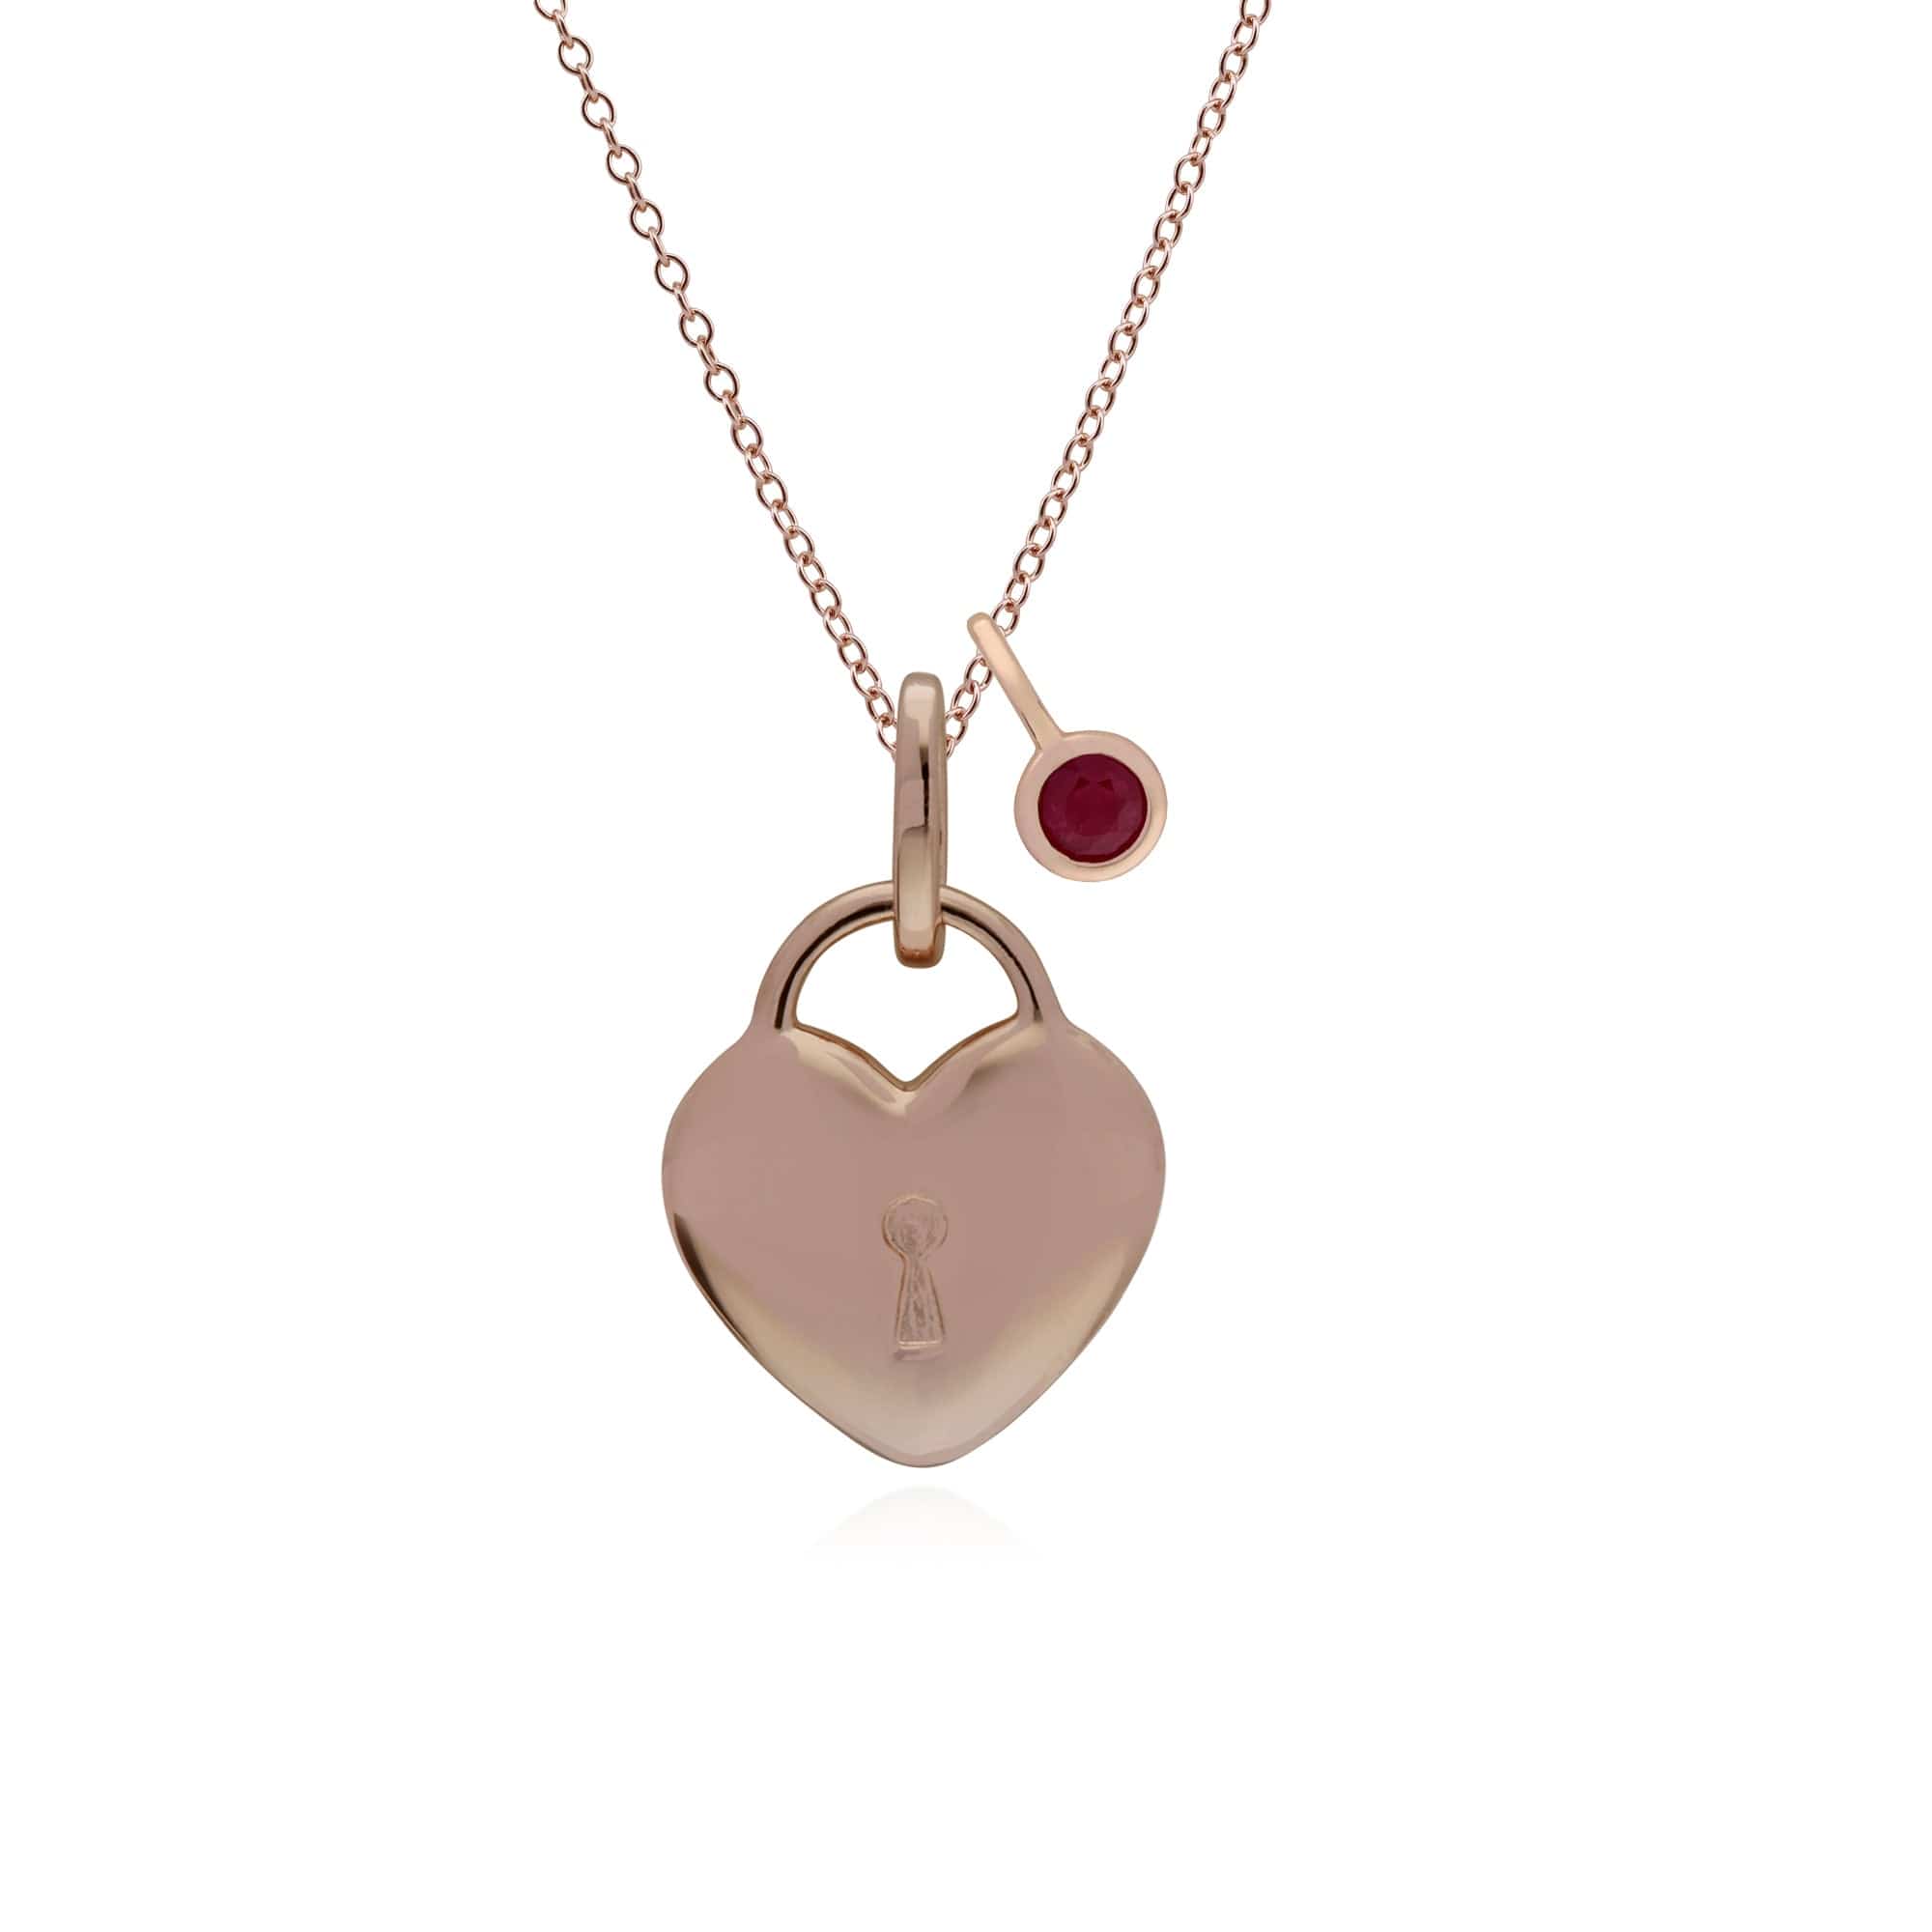 270P027309925-270P026901925 Classic Heart Lock Pendant & Ruby Charm in Rose Gold Plated 925 Sterling Silver 1